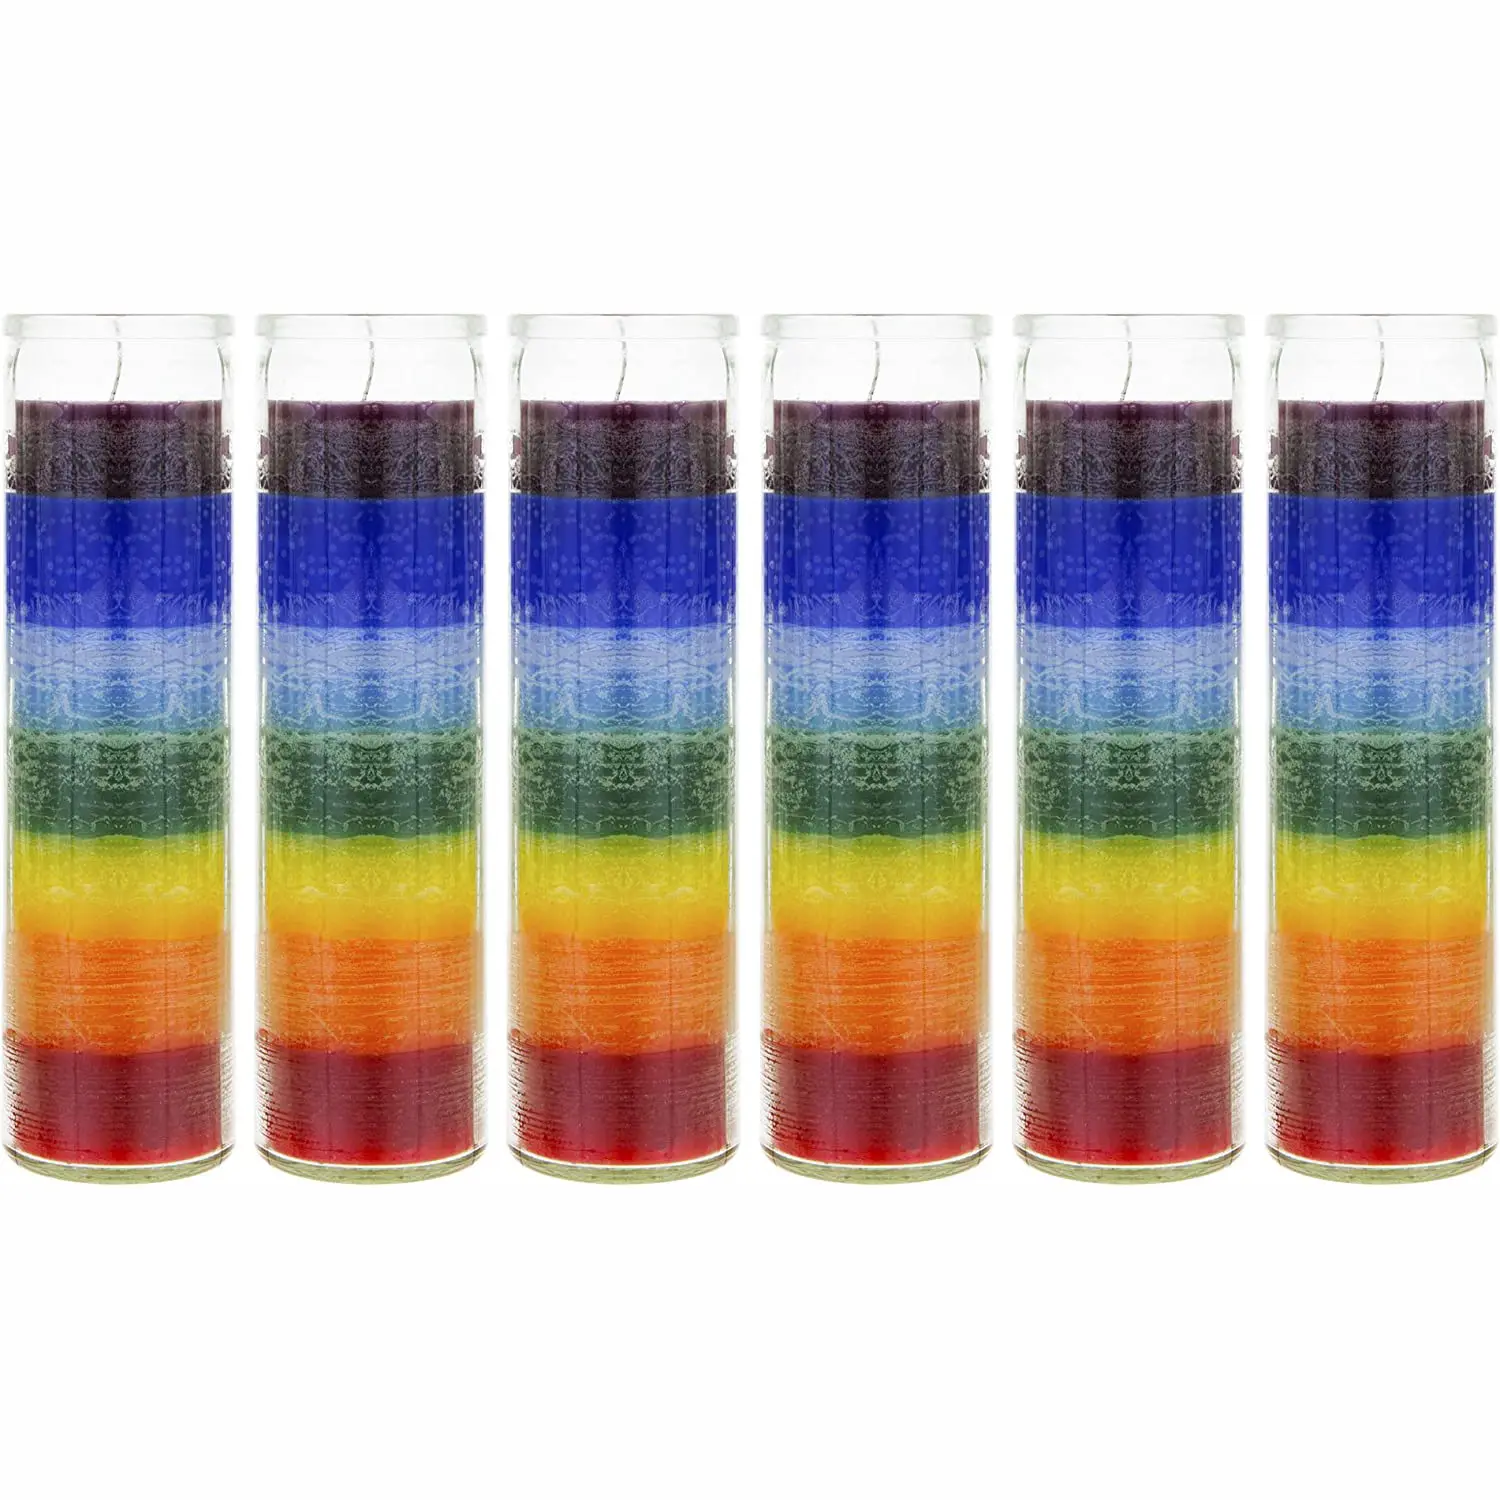 High Quality Customized 7 Day 7 Layers Church Blessing Ceremony Rainbow Spiritual Chakra Religious Glass Candle